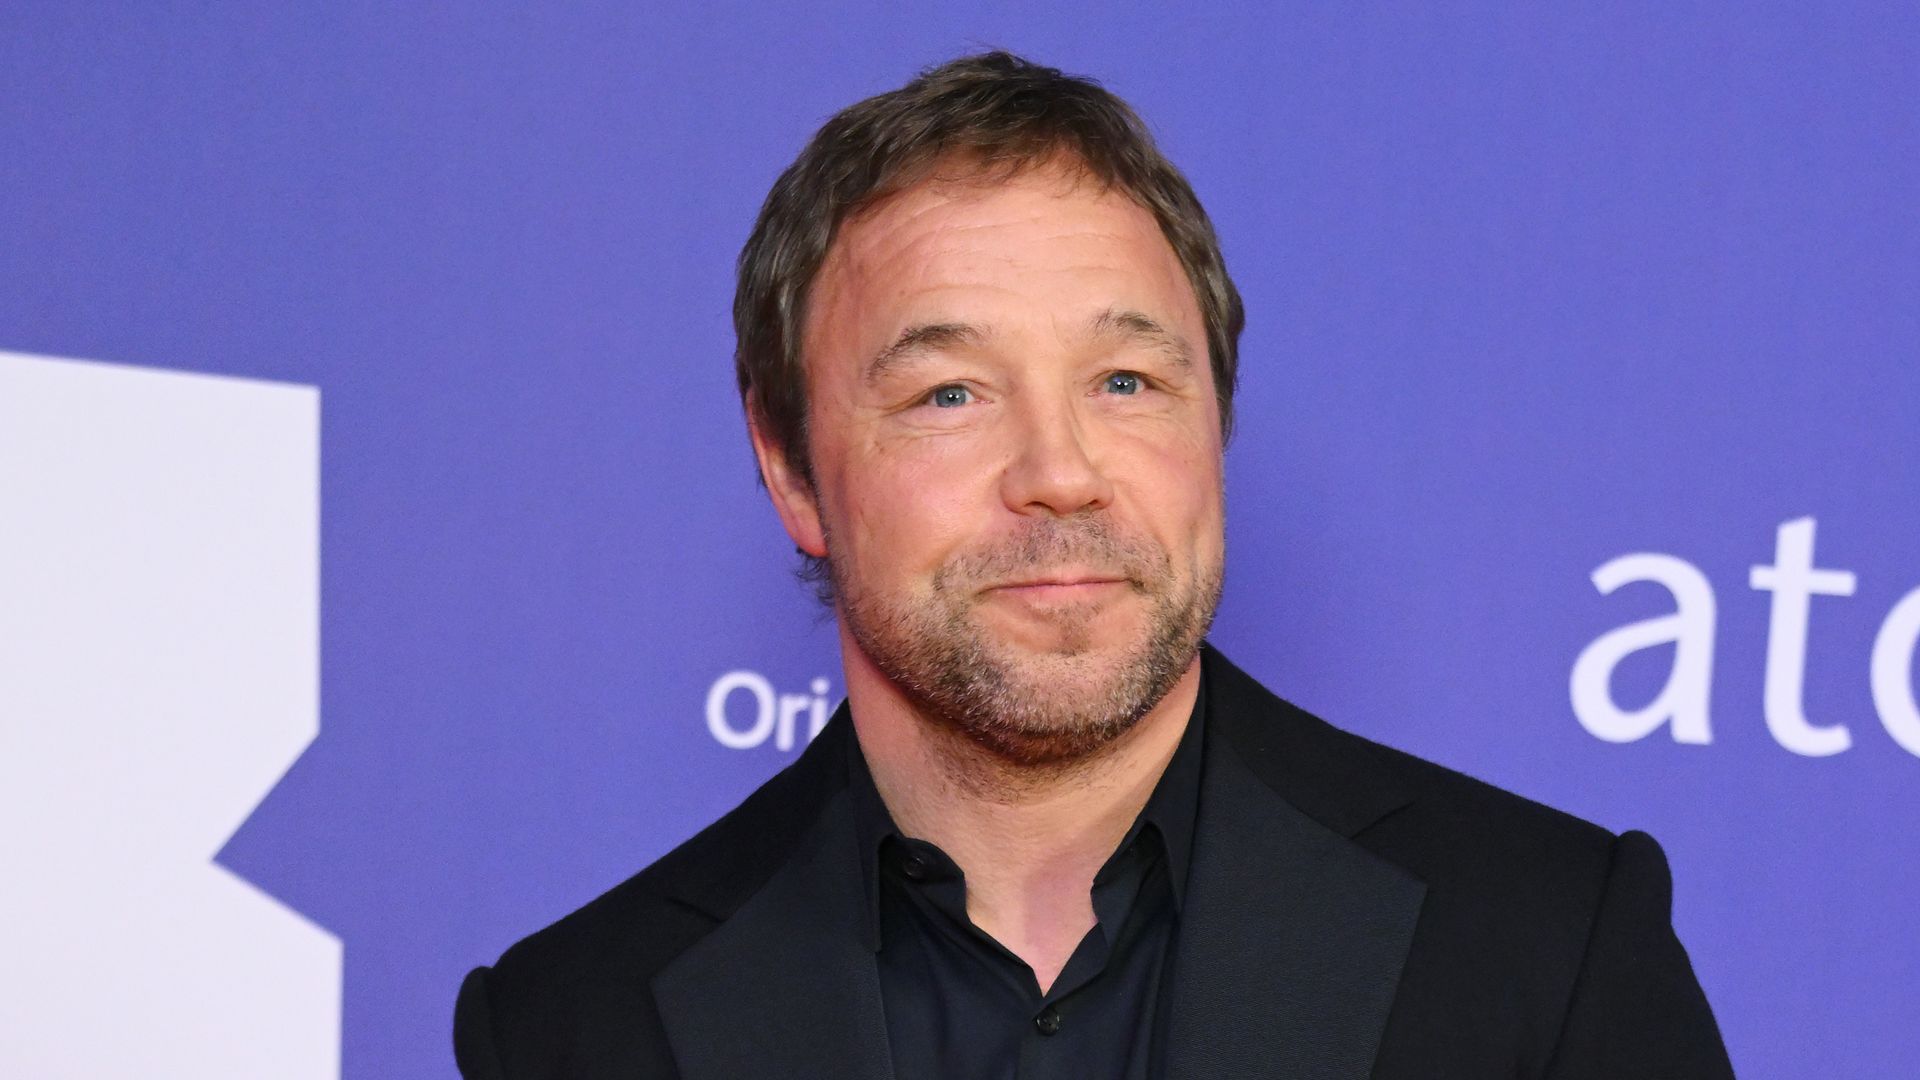 Stephen Graham teams up with Happy Valley and The Crown favourites on gripping new drama